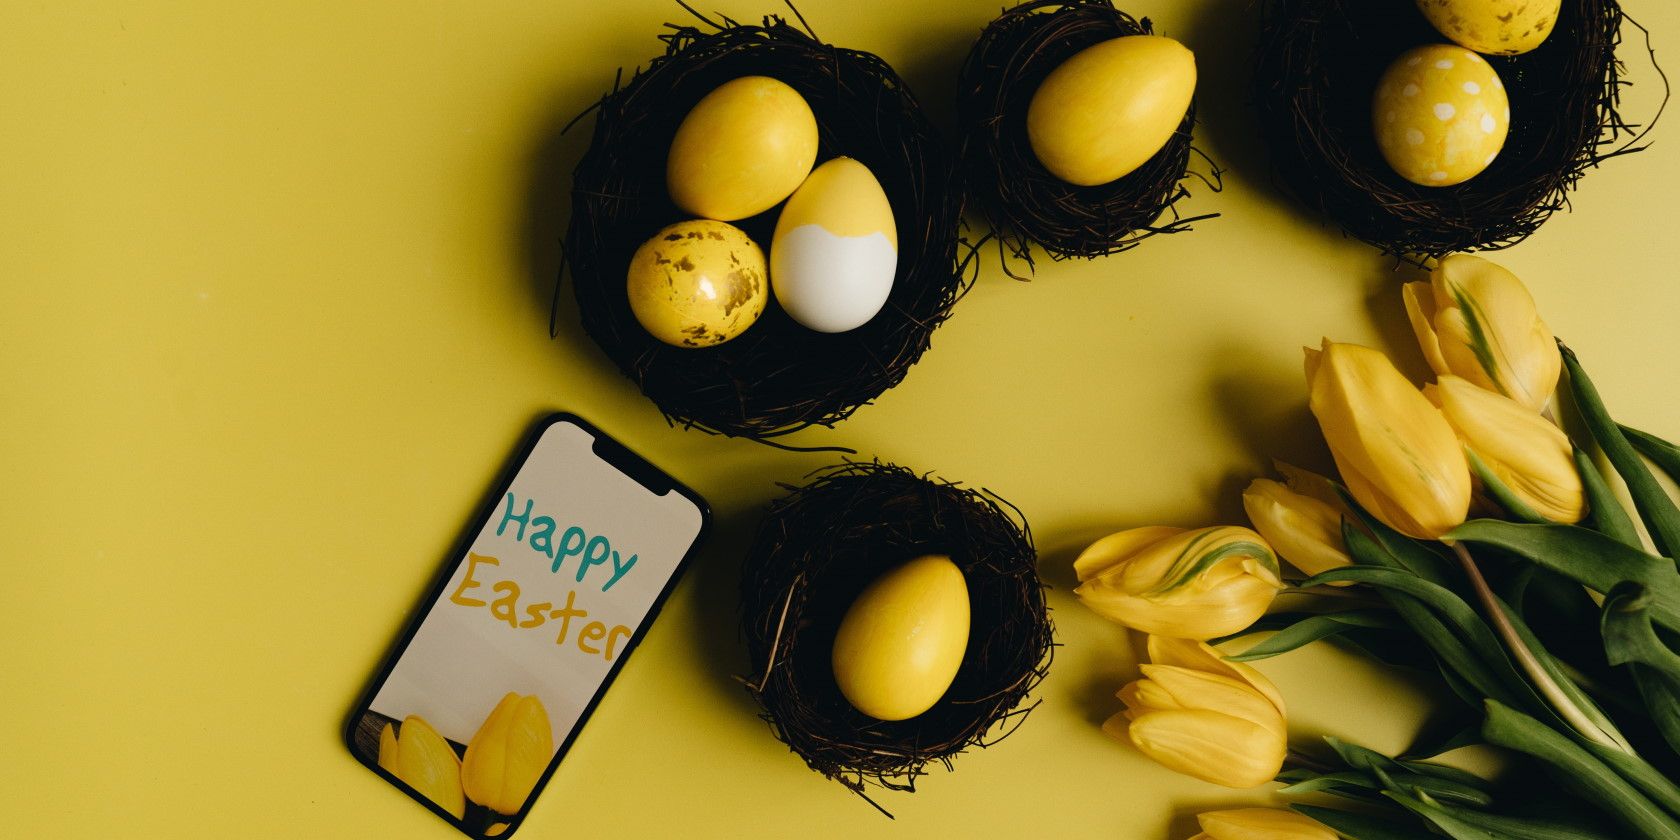 Smartphone with Happy Easter message alongside yellow Easter eggs and flowers